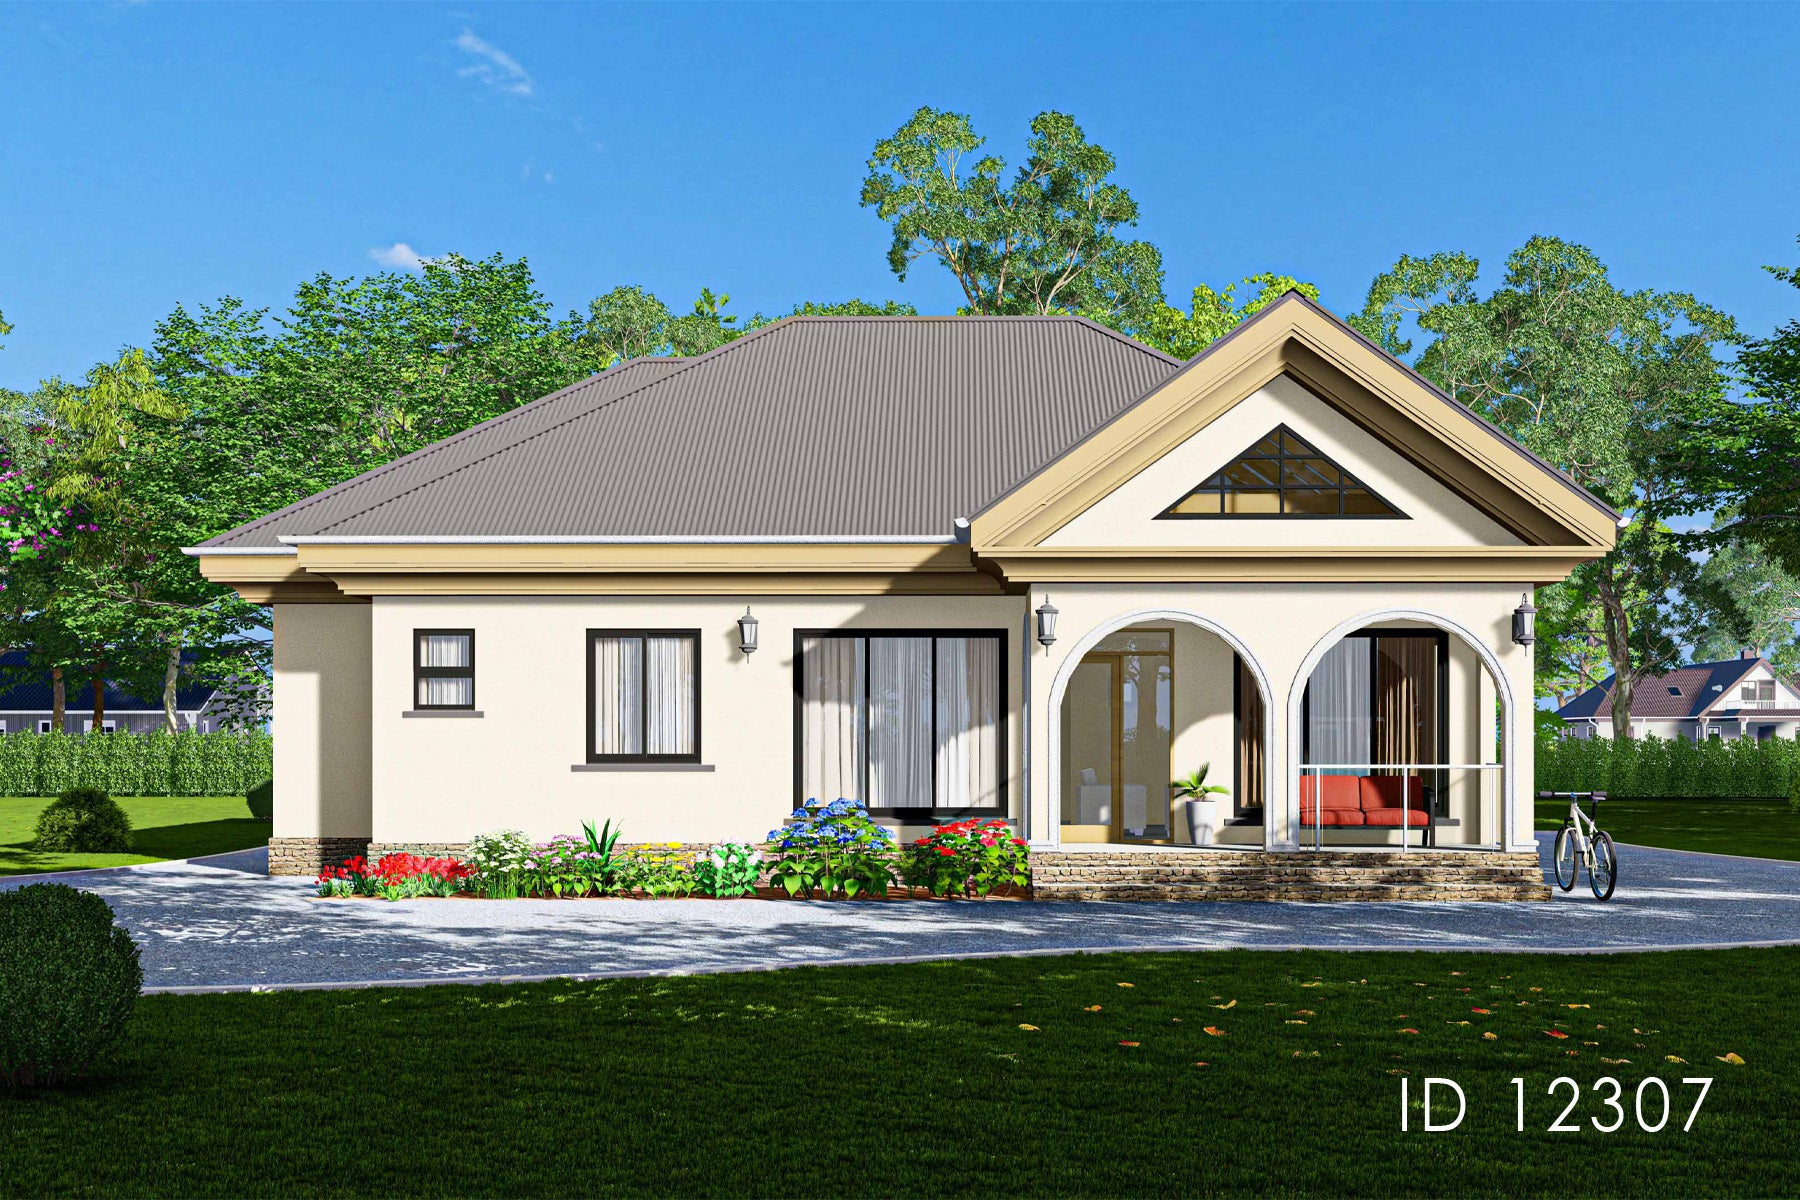 Modern affordable 2-bedroom house plan - ID 12307 - Area 139 sqm